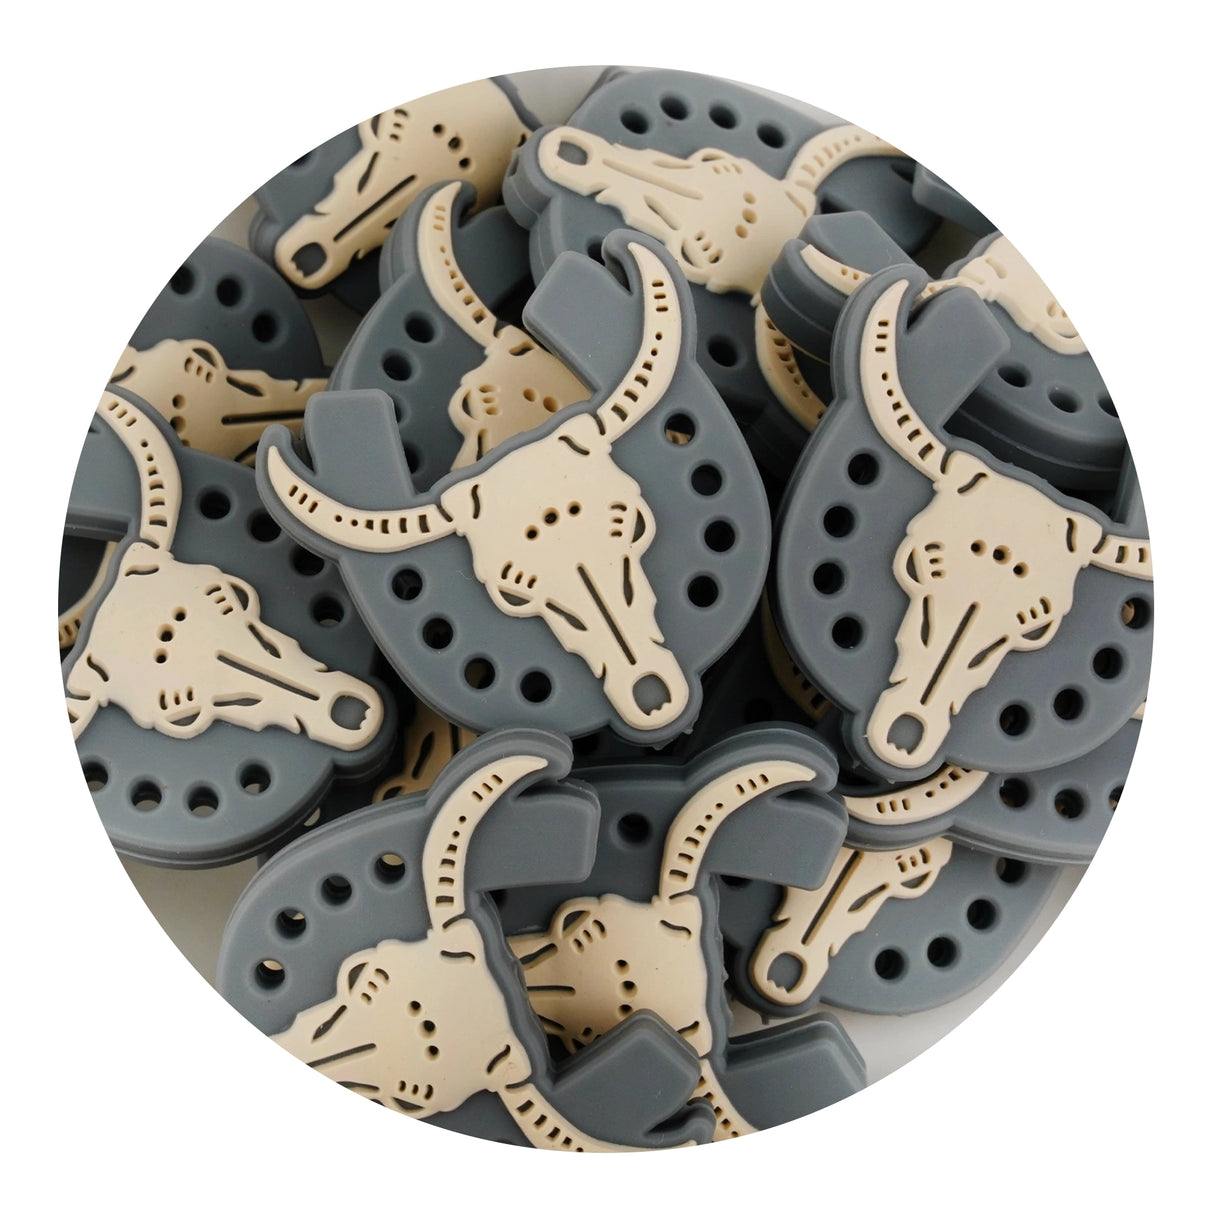 Silicone Focal Bead Cattle - Navajo White